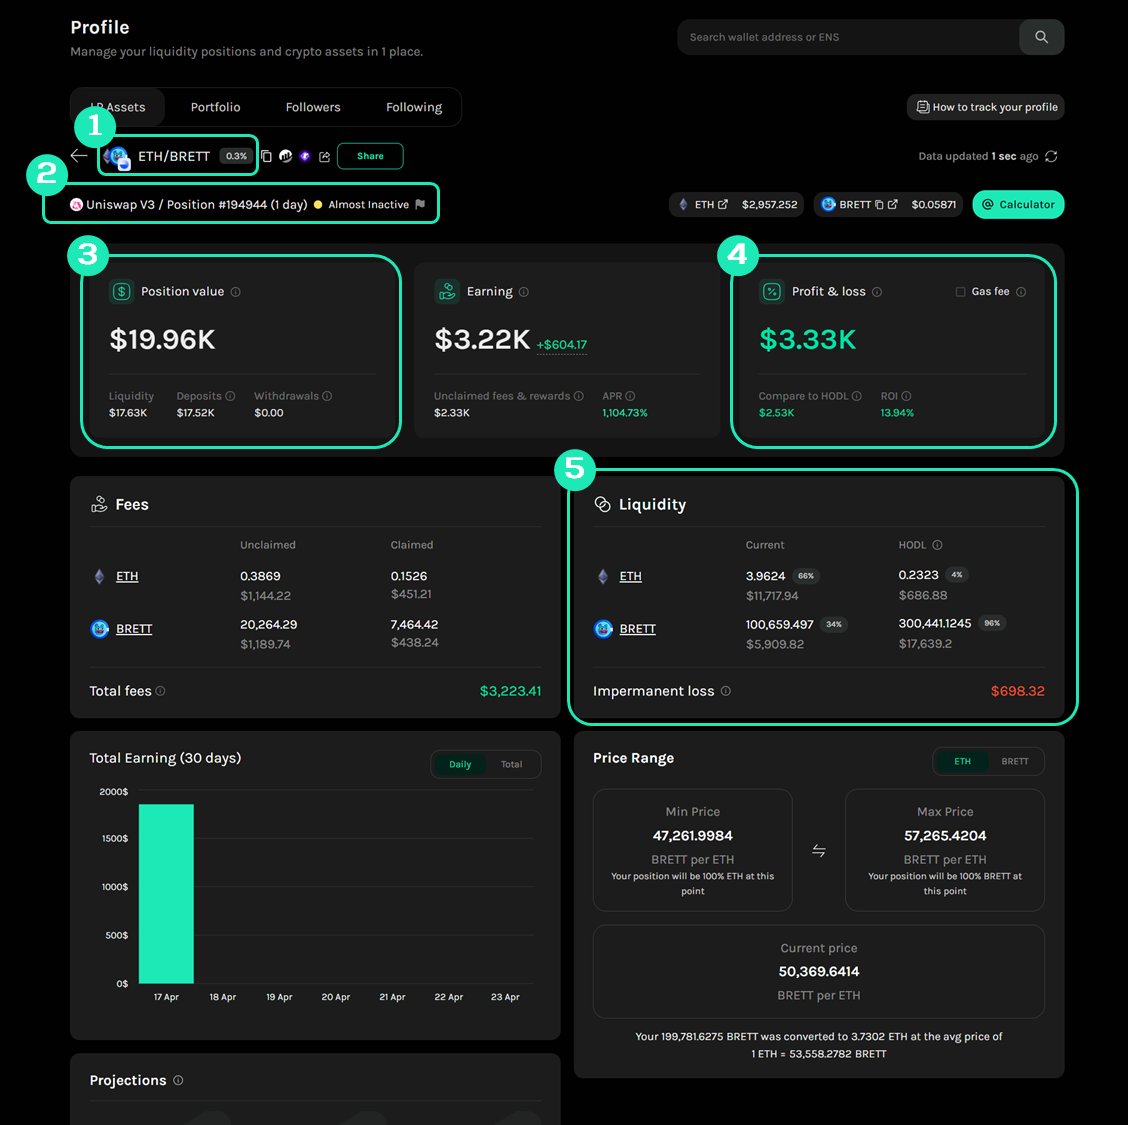 💰 Earn Huge Profit with Krystal on Base 💰 Since our post yesterday about @base, we have spotted a wallet which earned $3.3k from $17.6k liquidity within a day: 1⃣ Pool: ETH/BRETT 3% 2⃣ Protocol & Duration: @Uniswap V3 & 1 day 3⃣ Initial liquidity: $17.6k 4⃣ P&L: $3.3k 5⃣ IL: